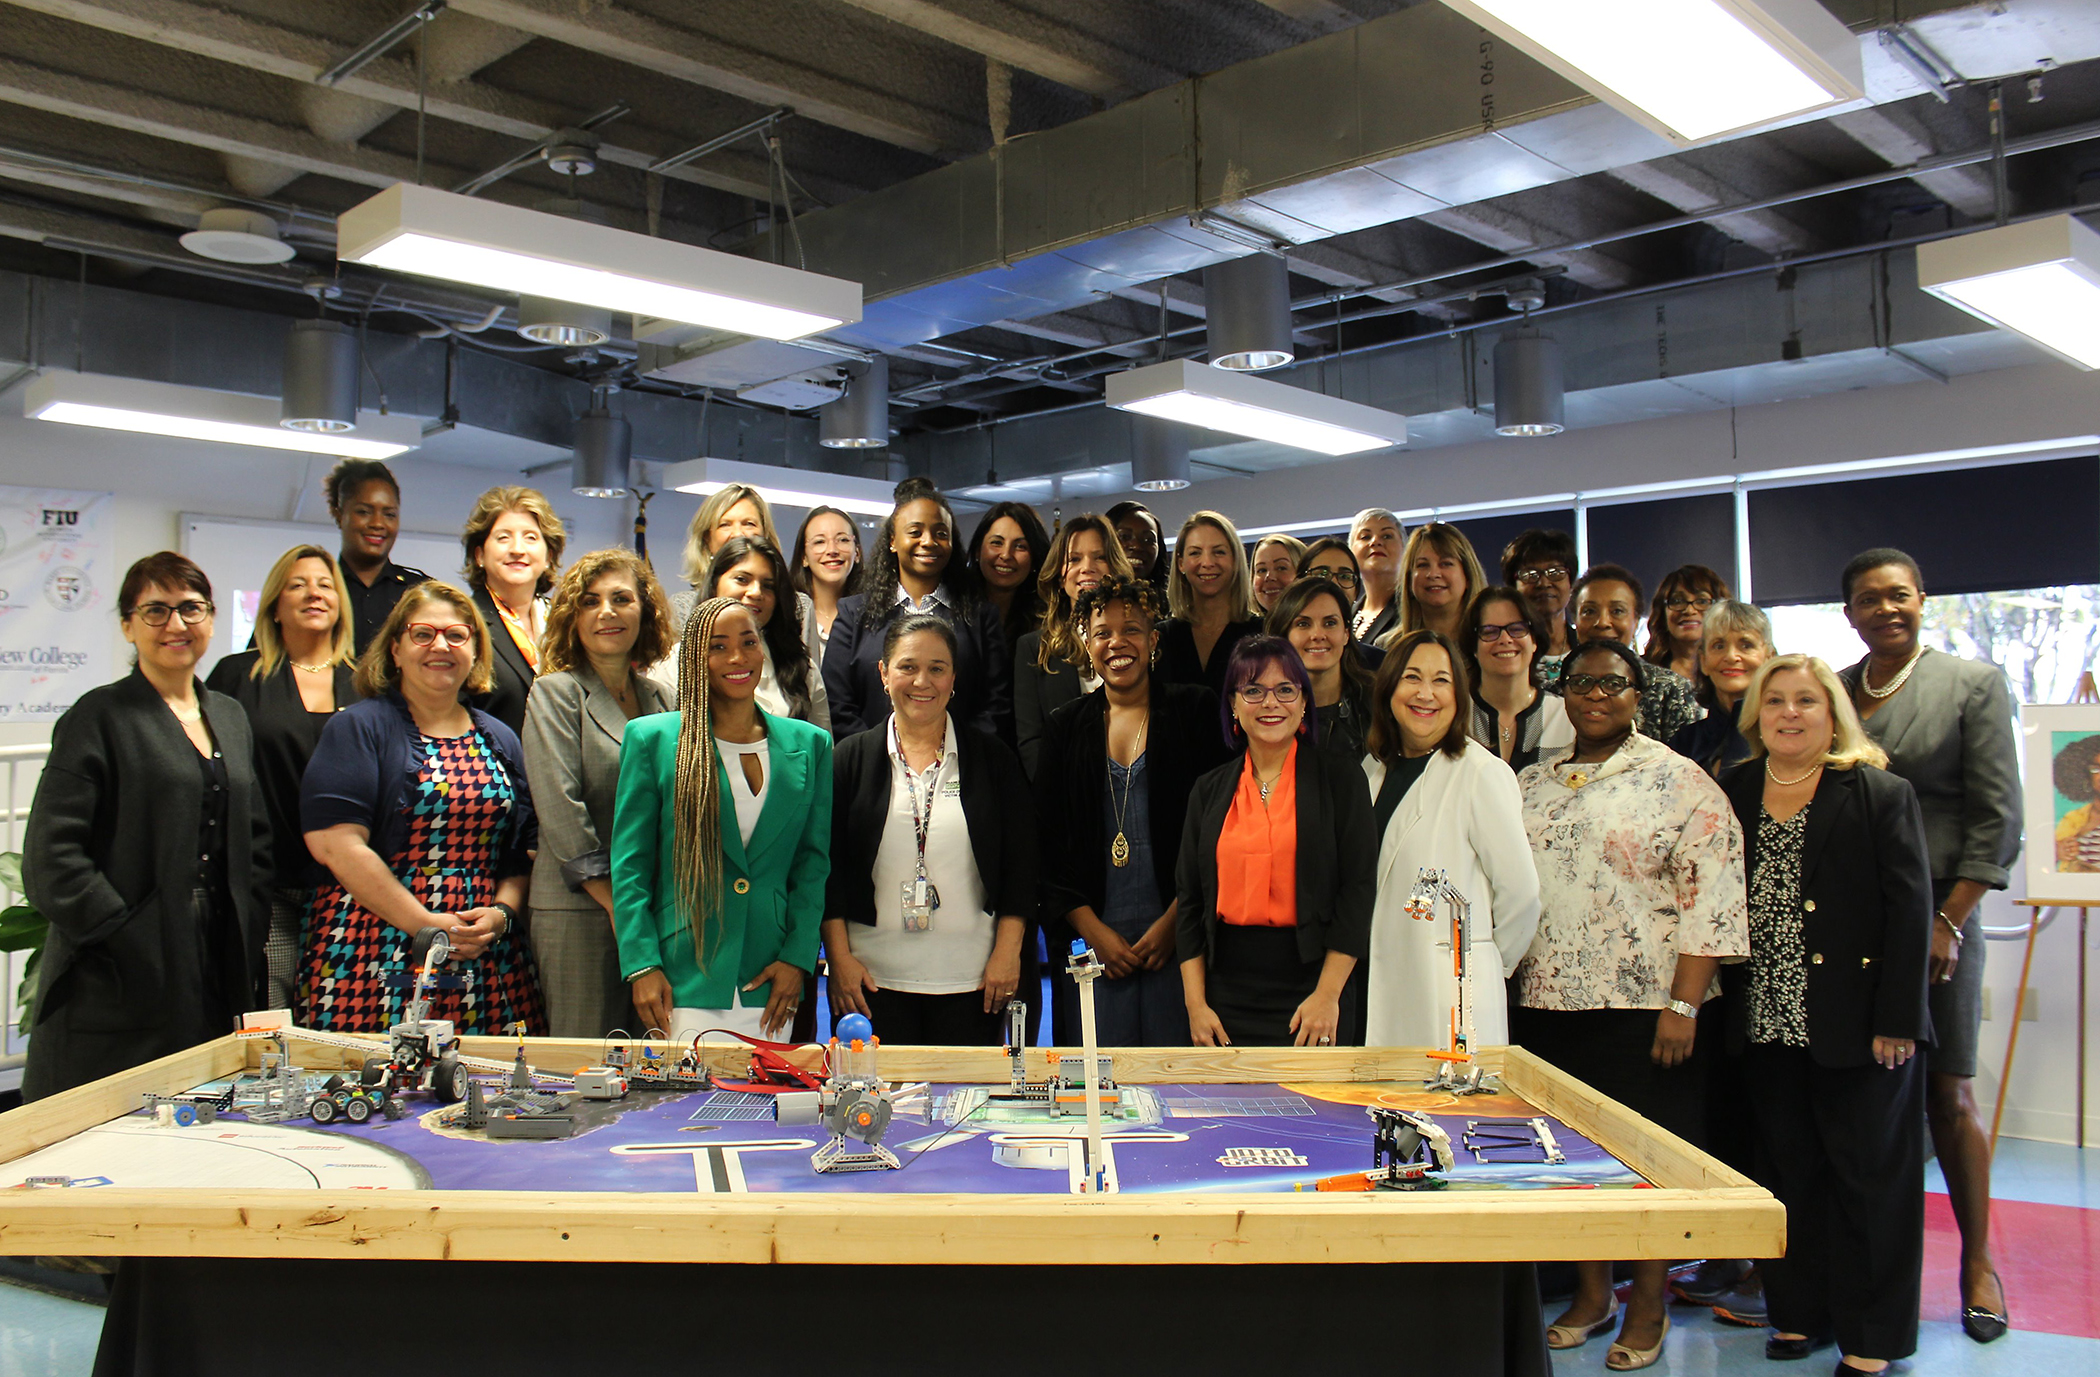 Group photo of college students and professionals over a worktable at a UCREW event